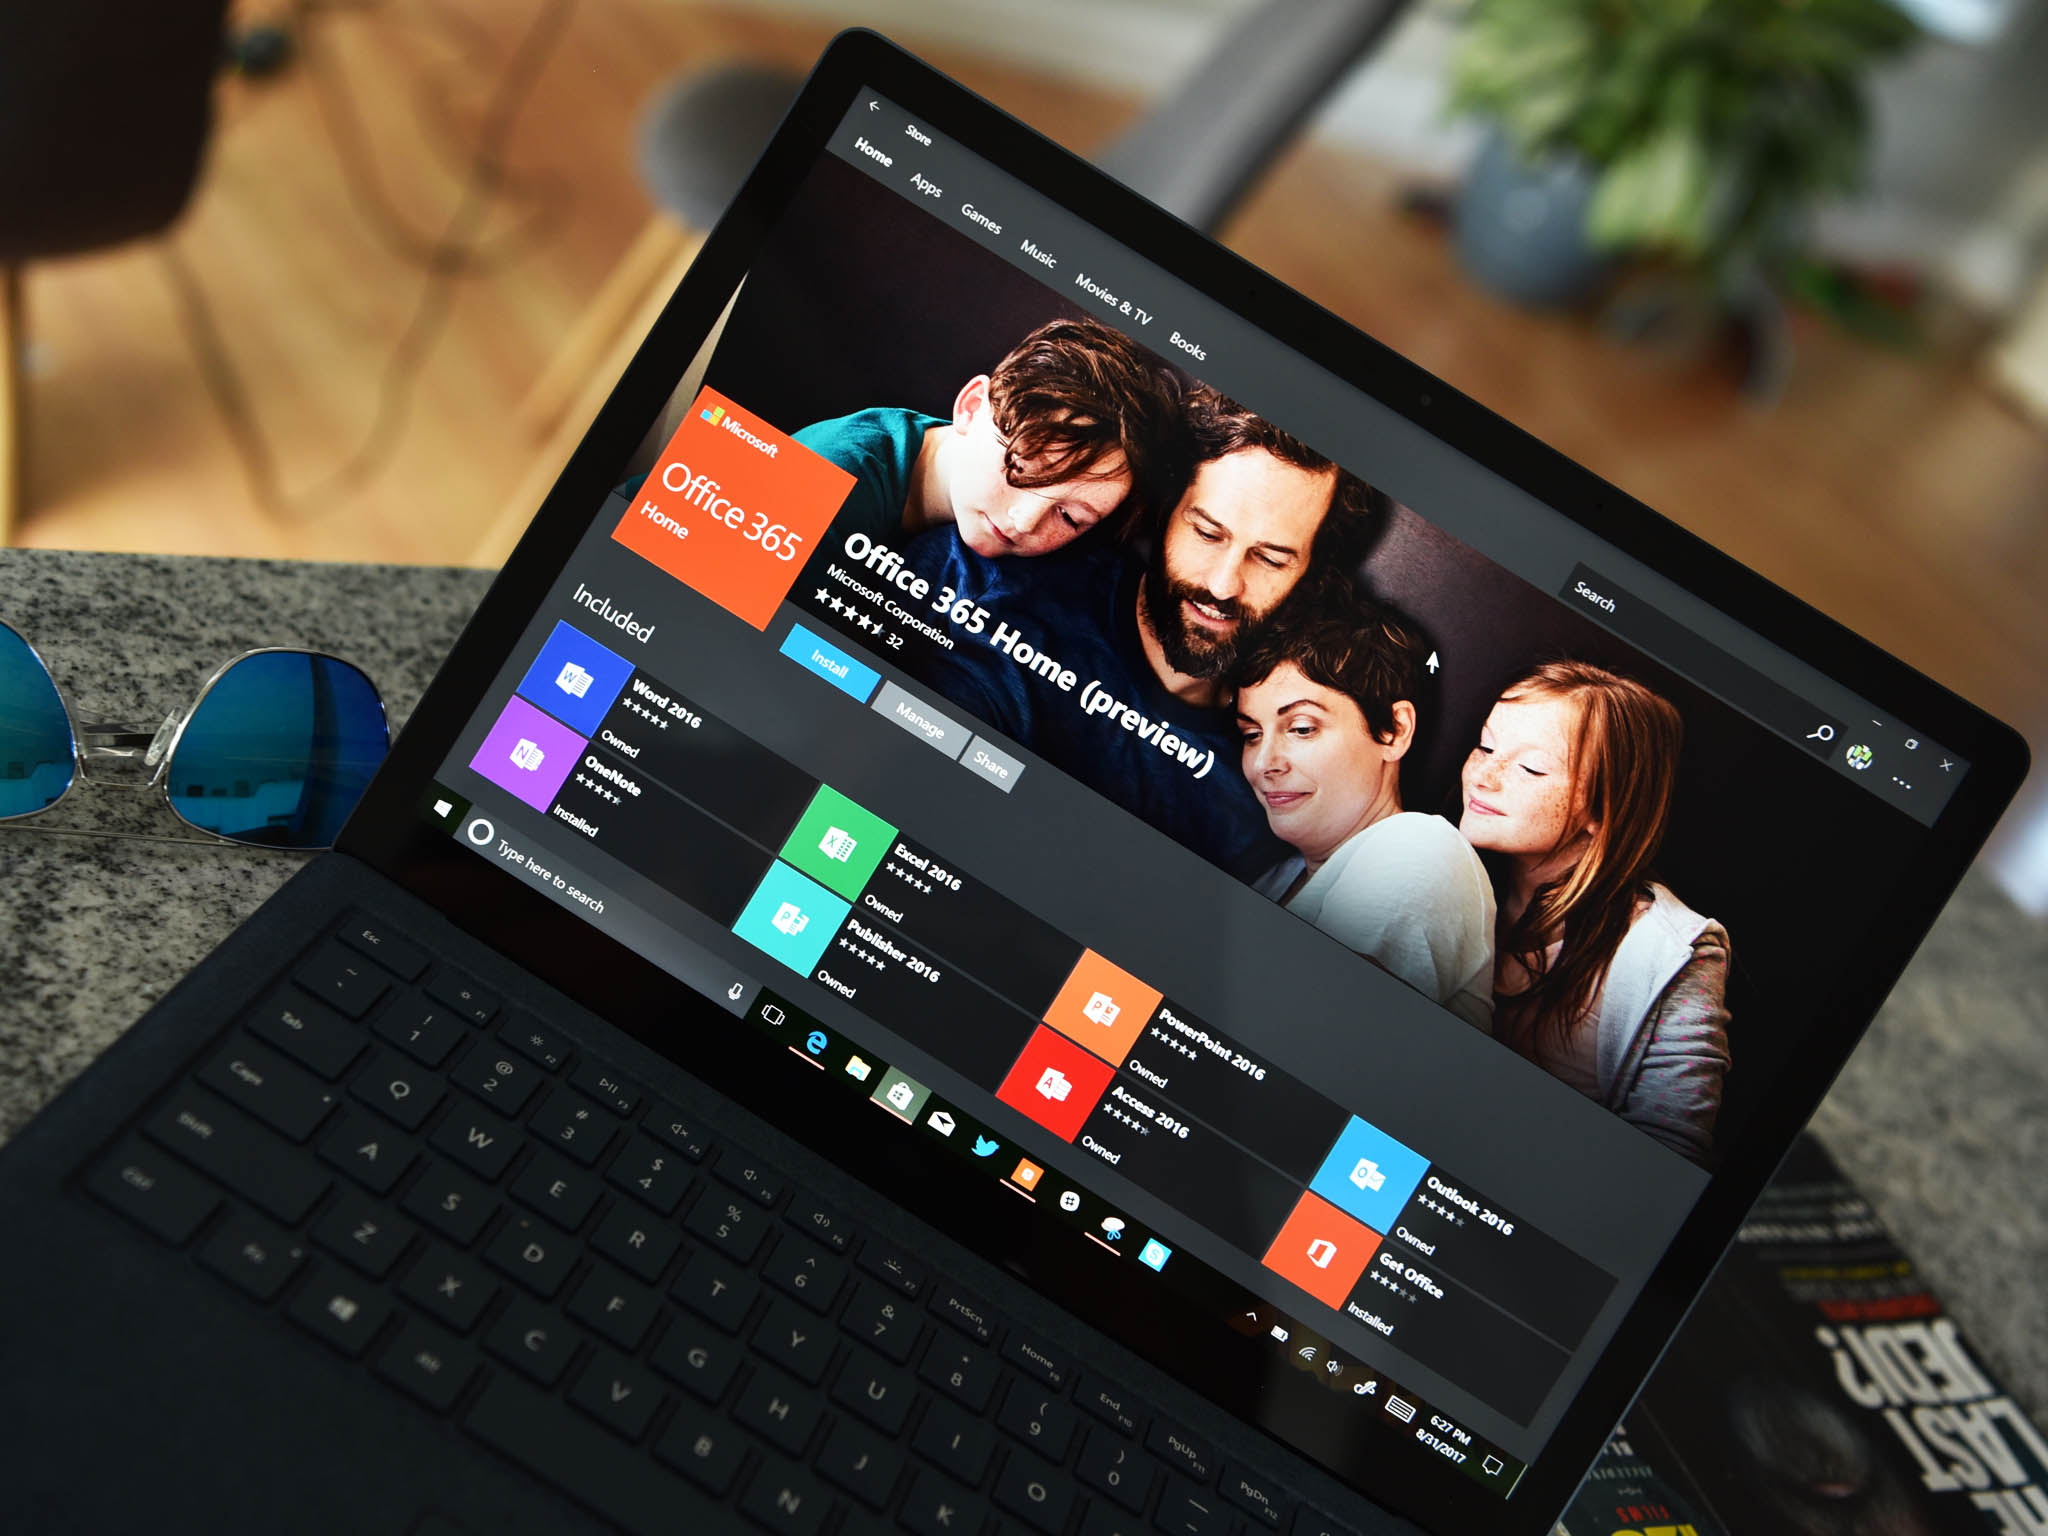 How to upgrade Office 365 Personal to Home edition so you can use it on more devices